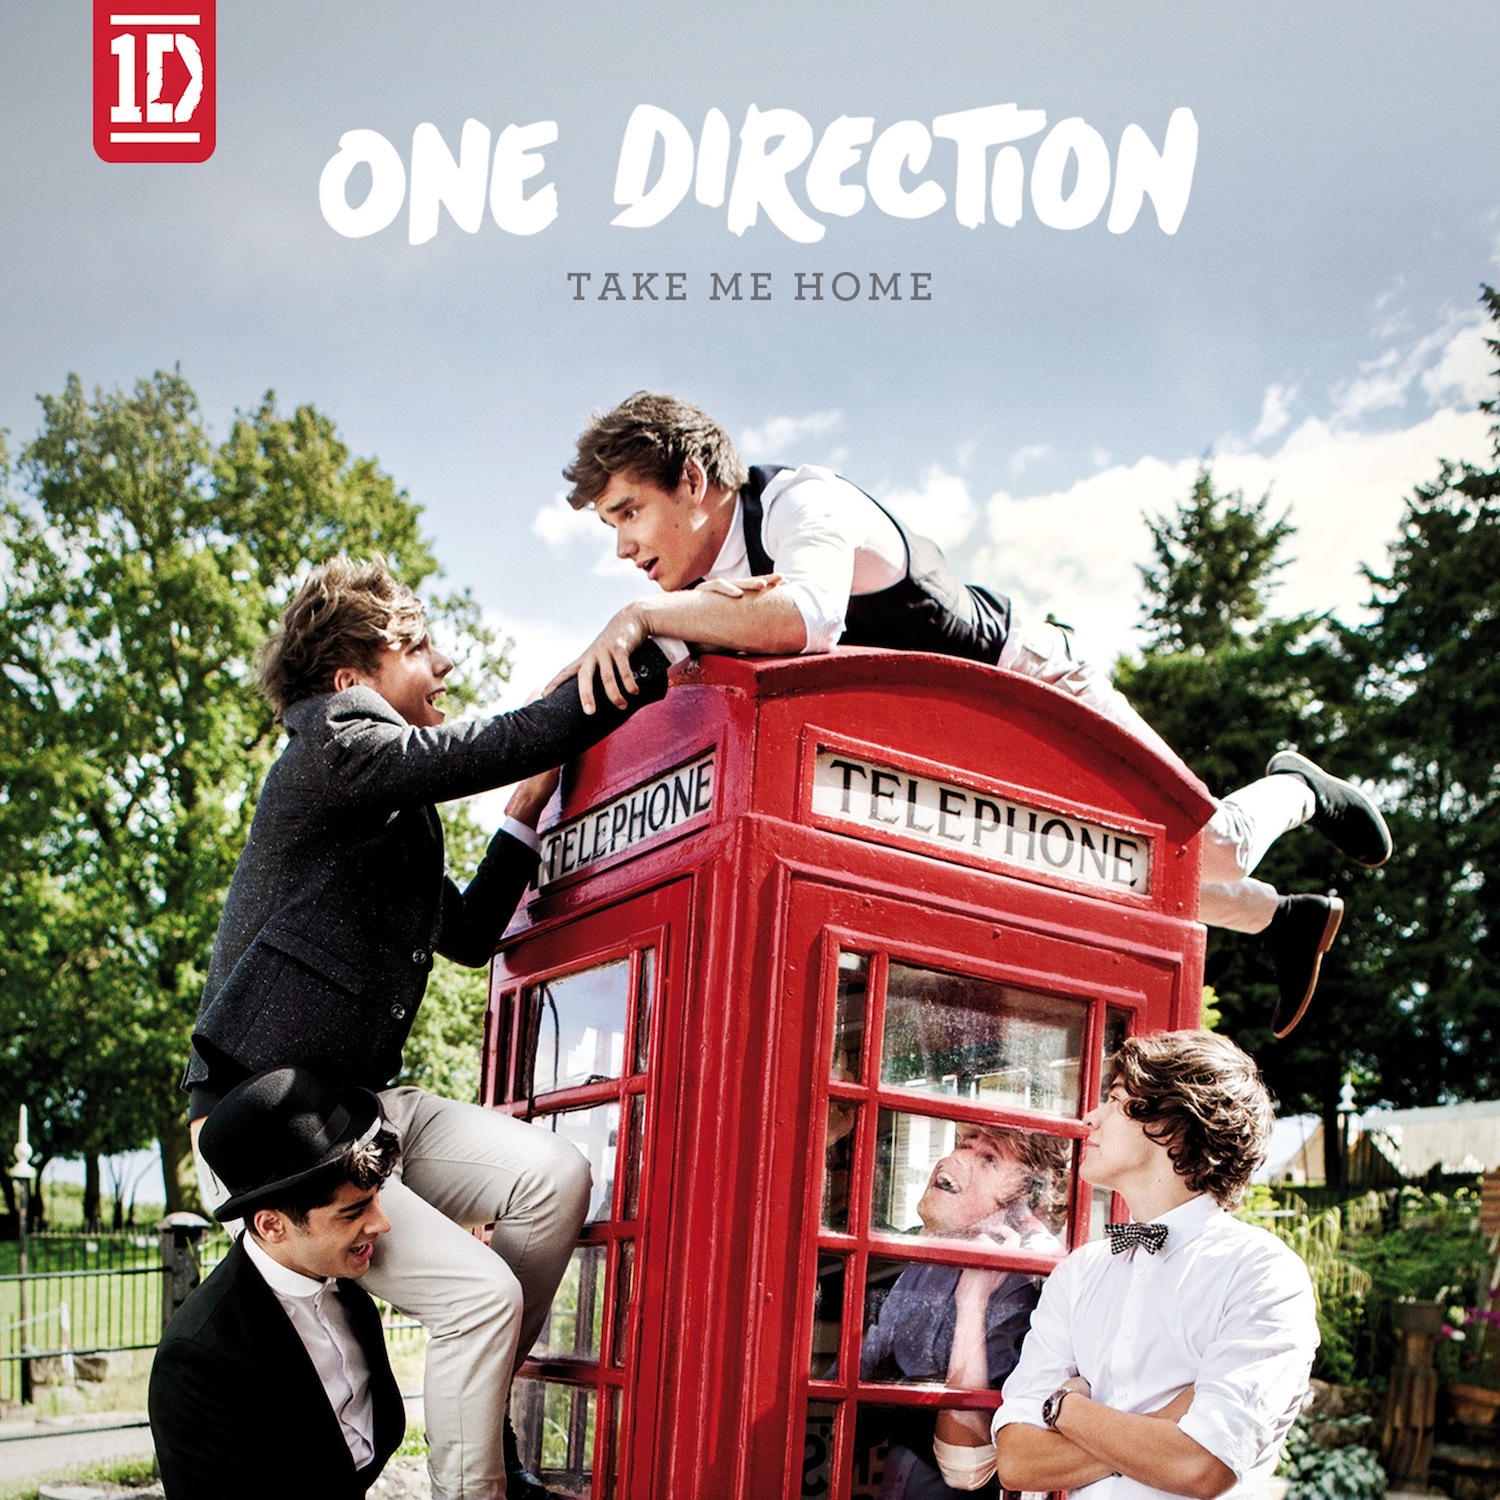 http://www.red17.com/pics/2012/12/onedirectiontakemehomecover.jpeg